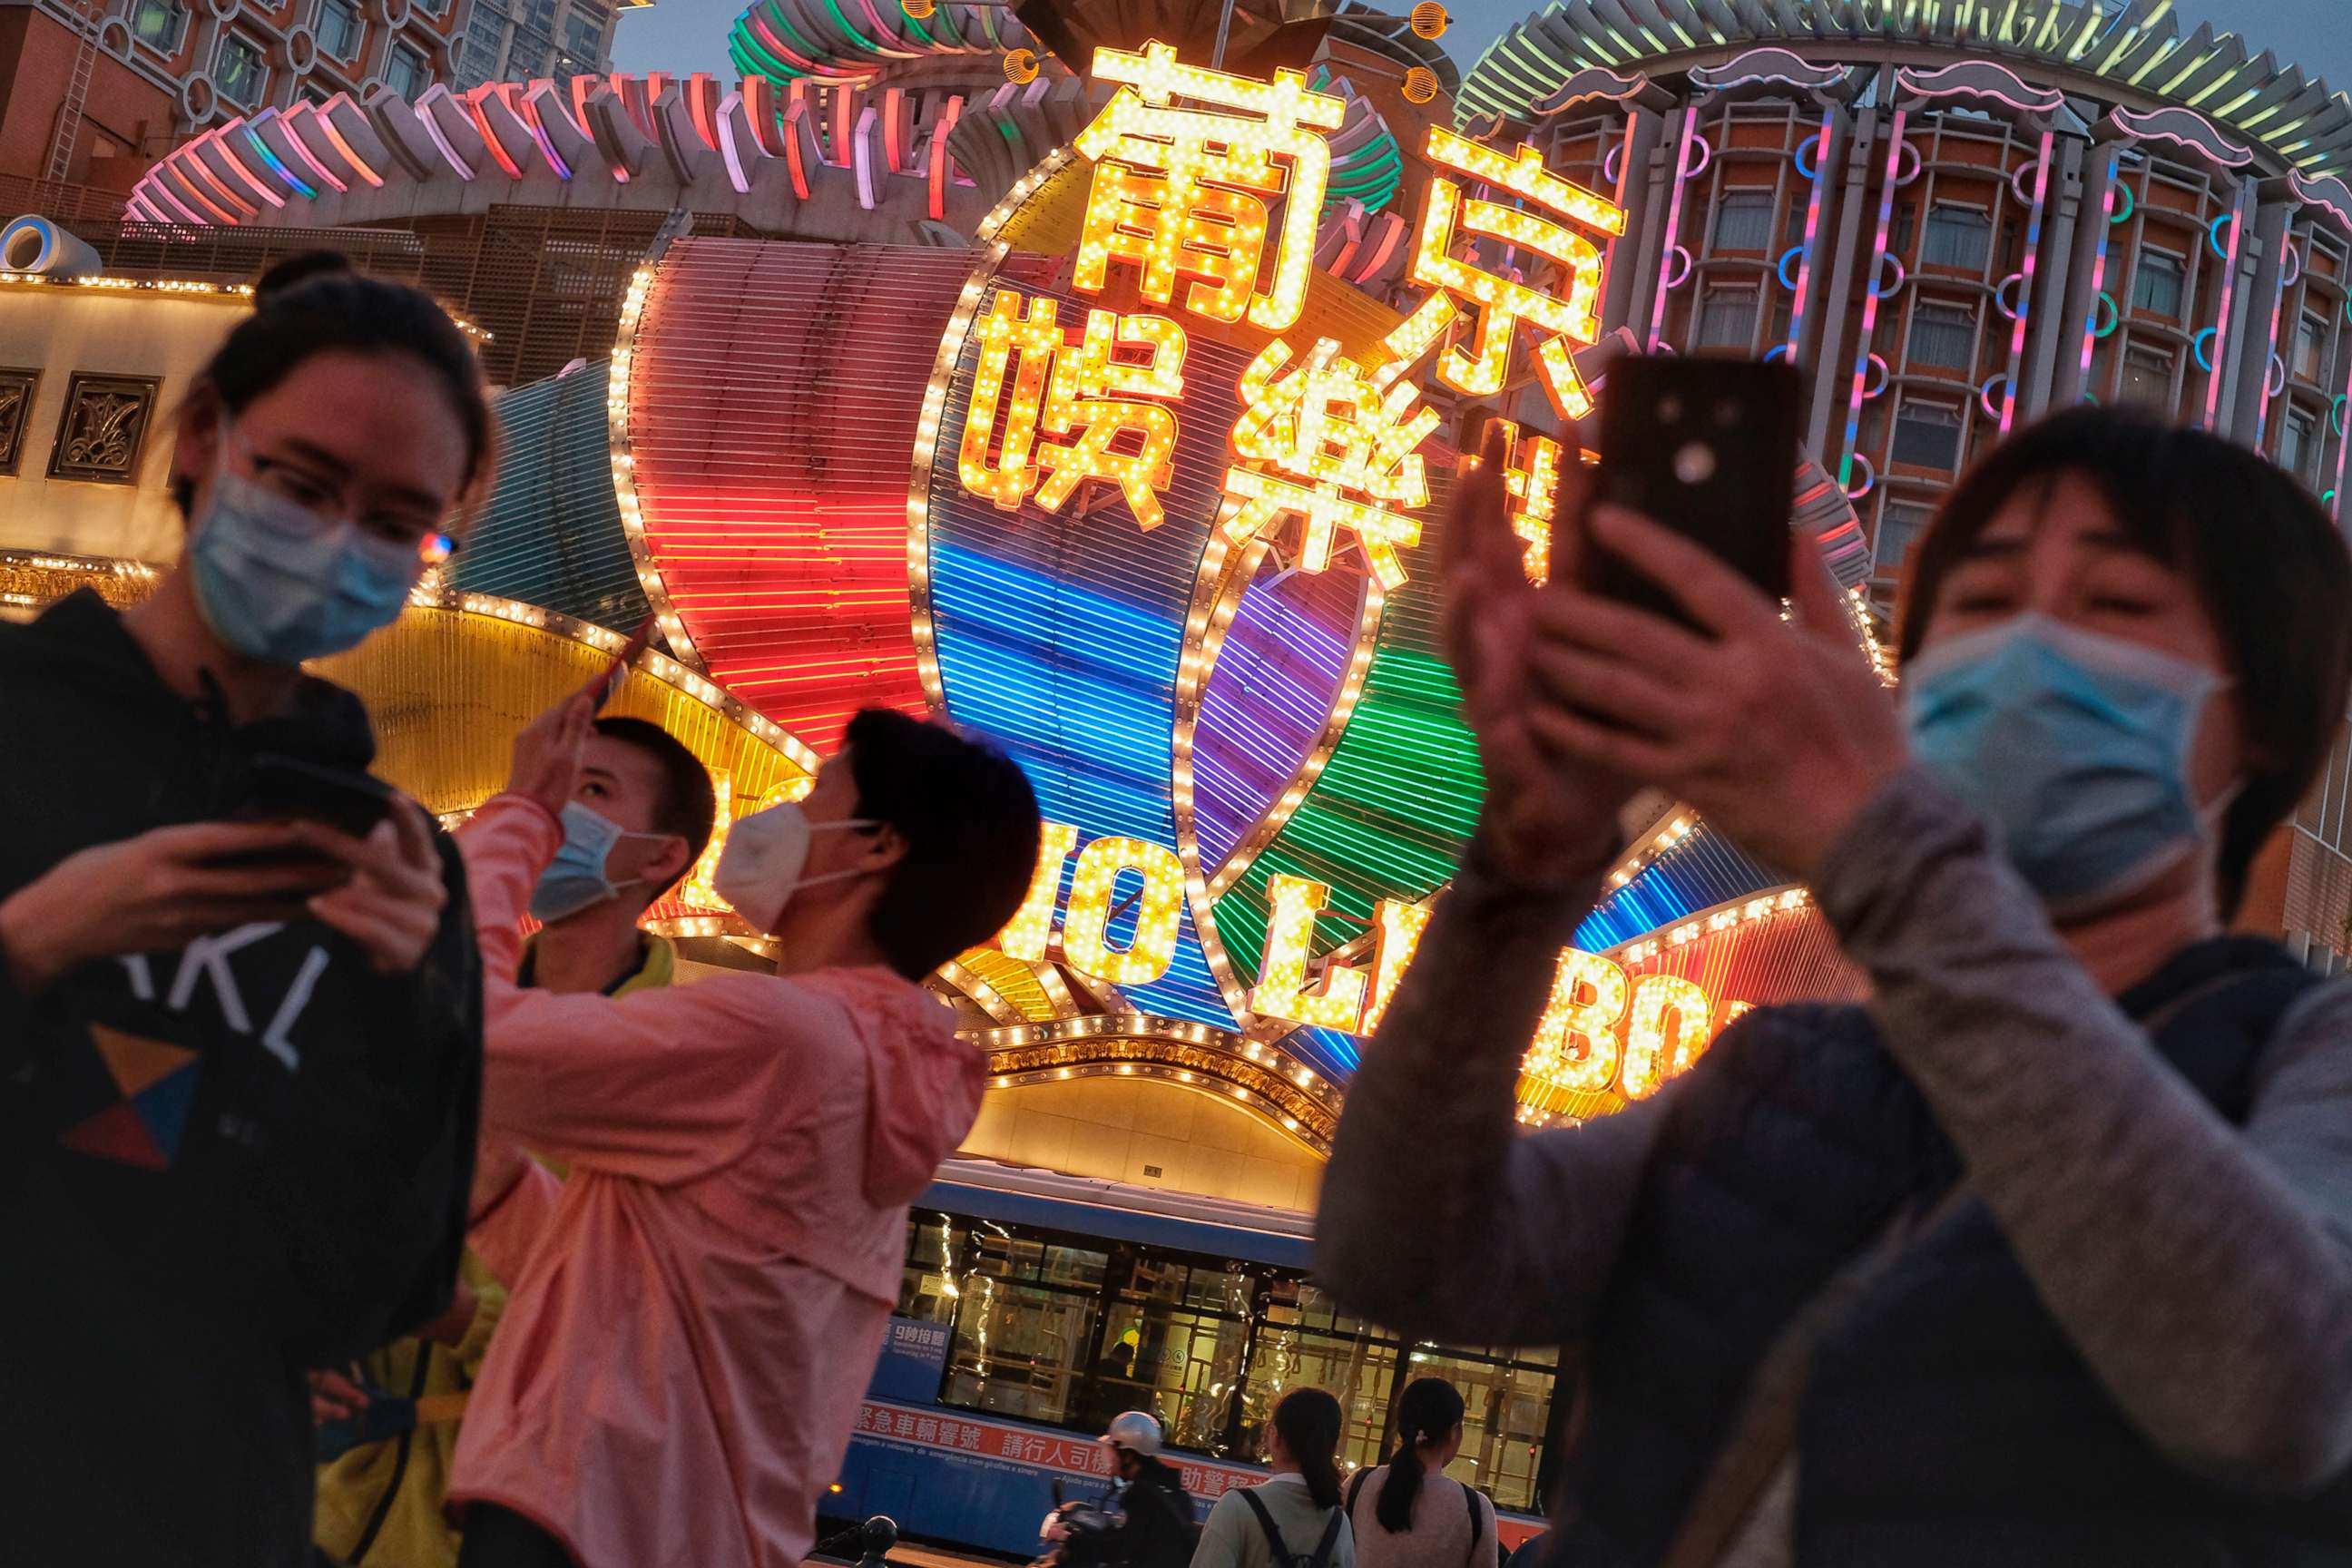 PHOTO: In this Jan, 23, 2020, file photo, released by Initium Media, tourists wearing masks, take photographs outside the Casino Lisboa in Macao, China.